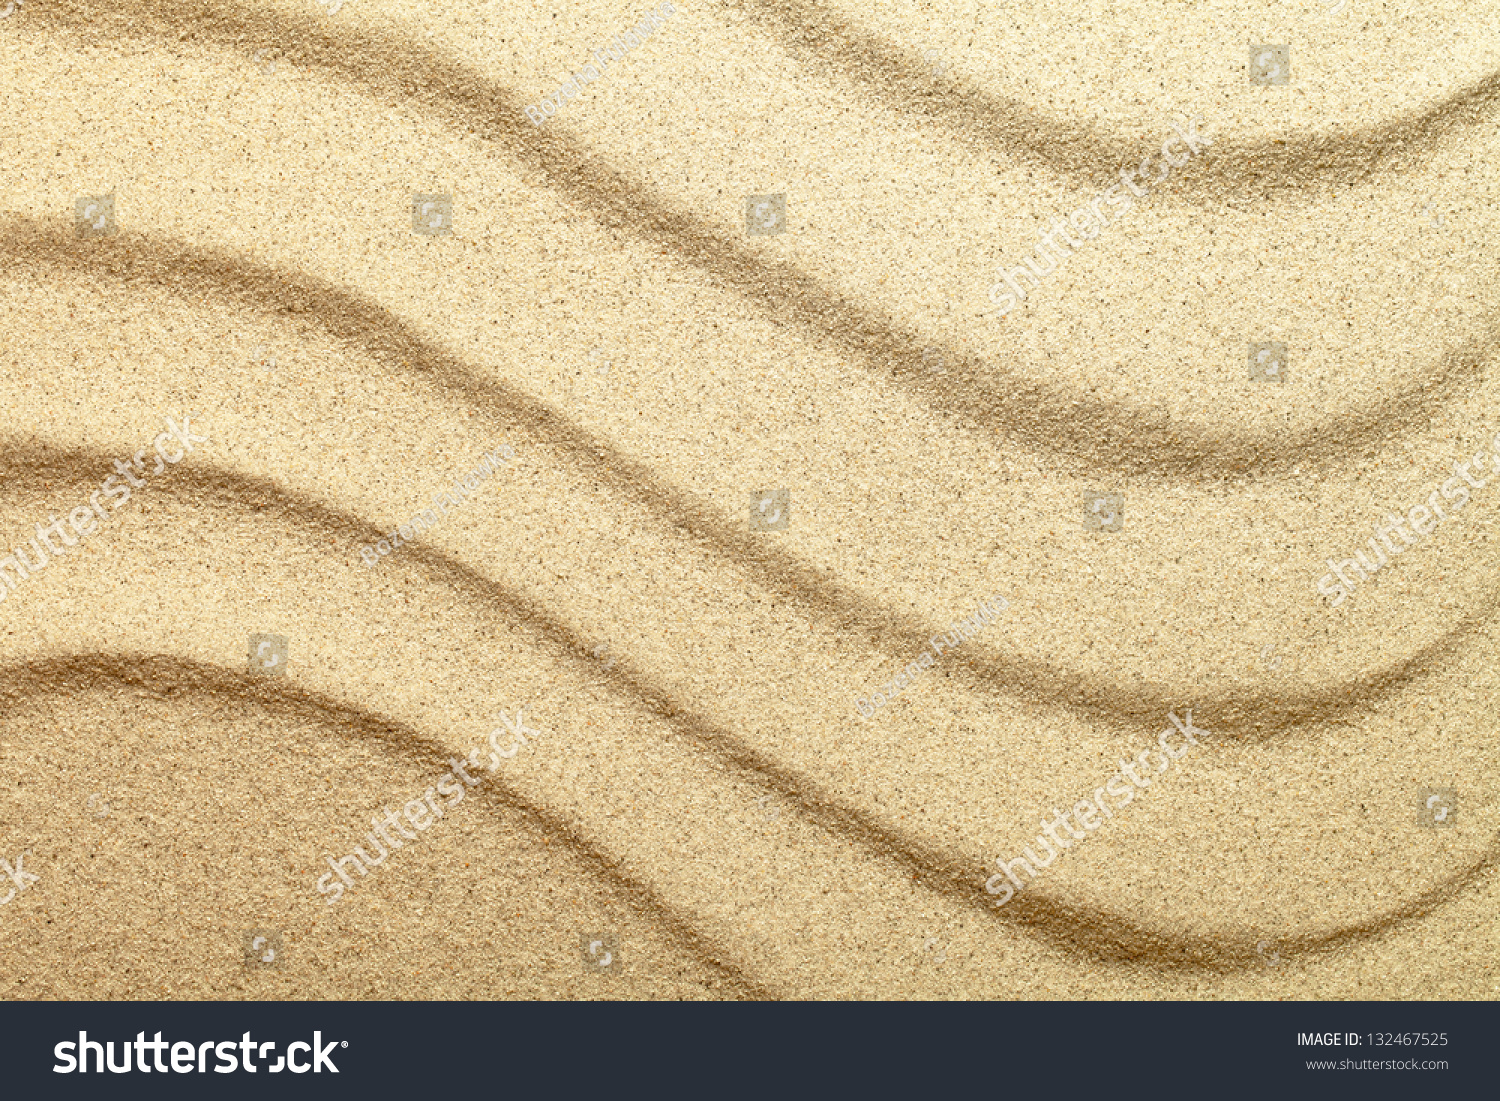 Sand Background. Sandy Beach Texture. Top View Stock Photo 132467525 ...